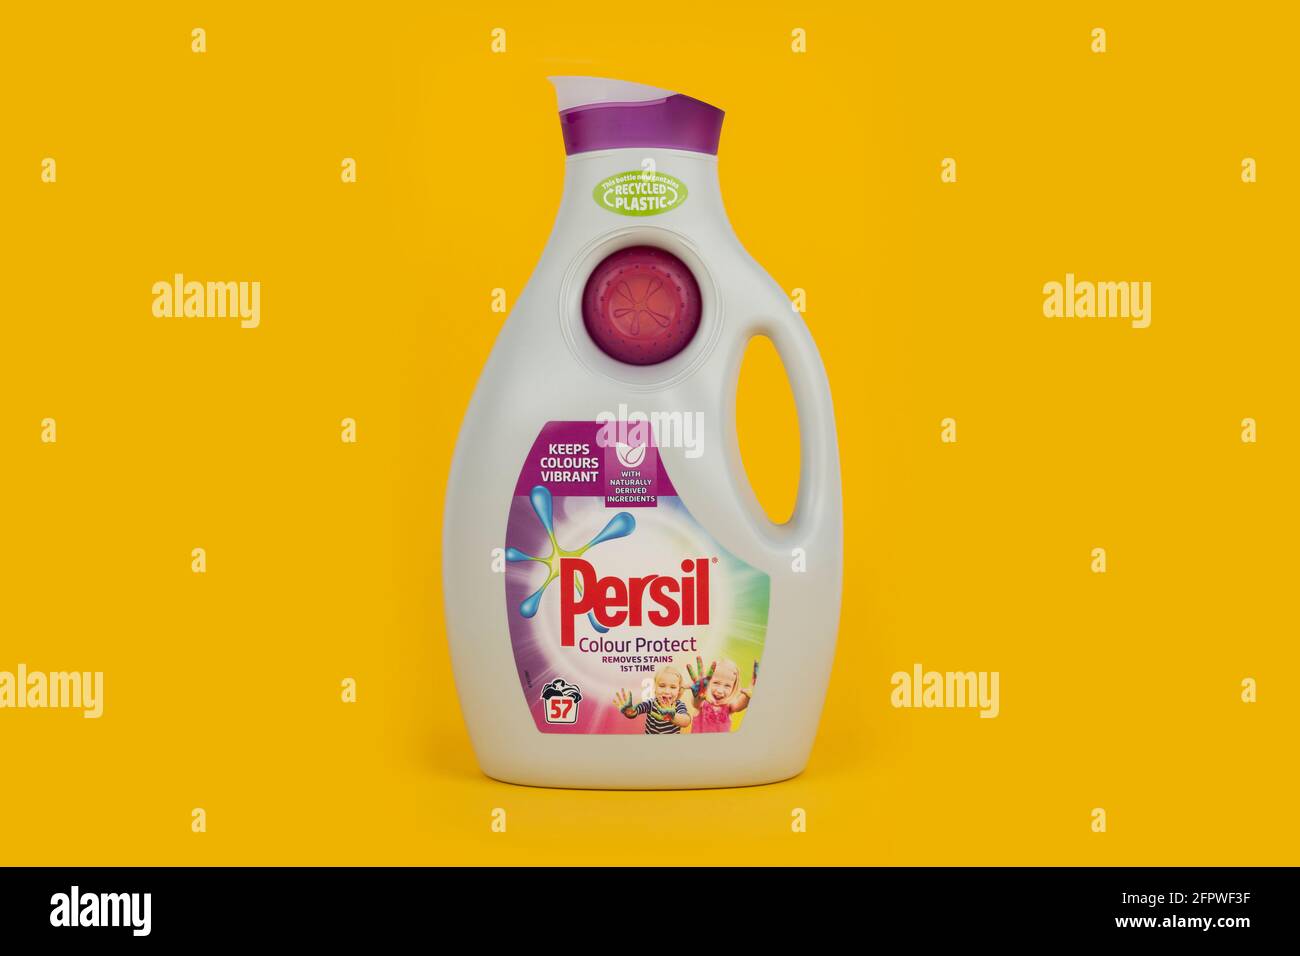 A bottle of Persil Colour Protect biological liquid laundry detergent shot on a yellow background. Stock Photo